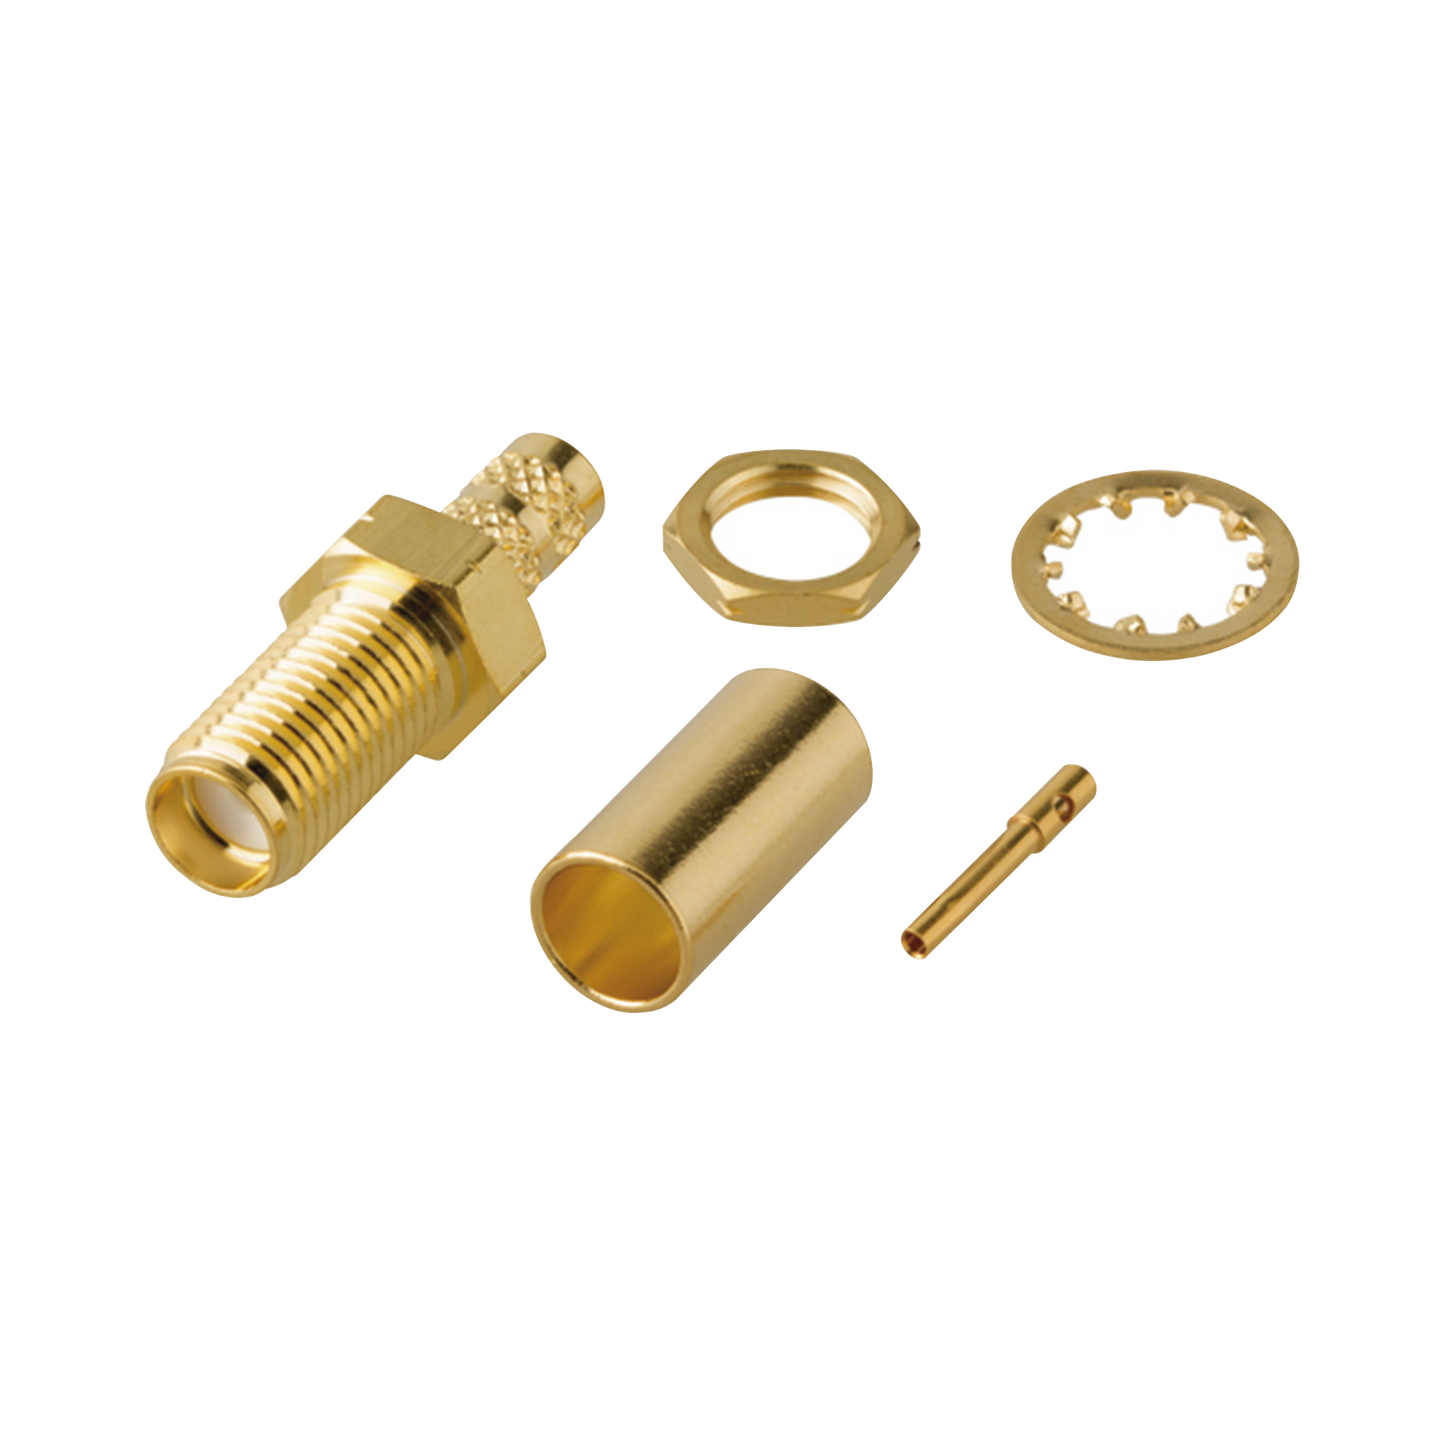 Bulkhead SMA Female Connector Reverse Thread to Crimp on Cable LMR-195 and Group C, Gold/ Gold/ PTFE.